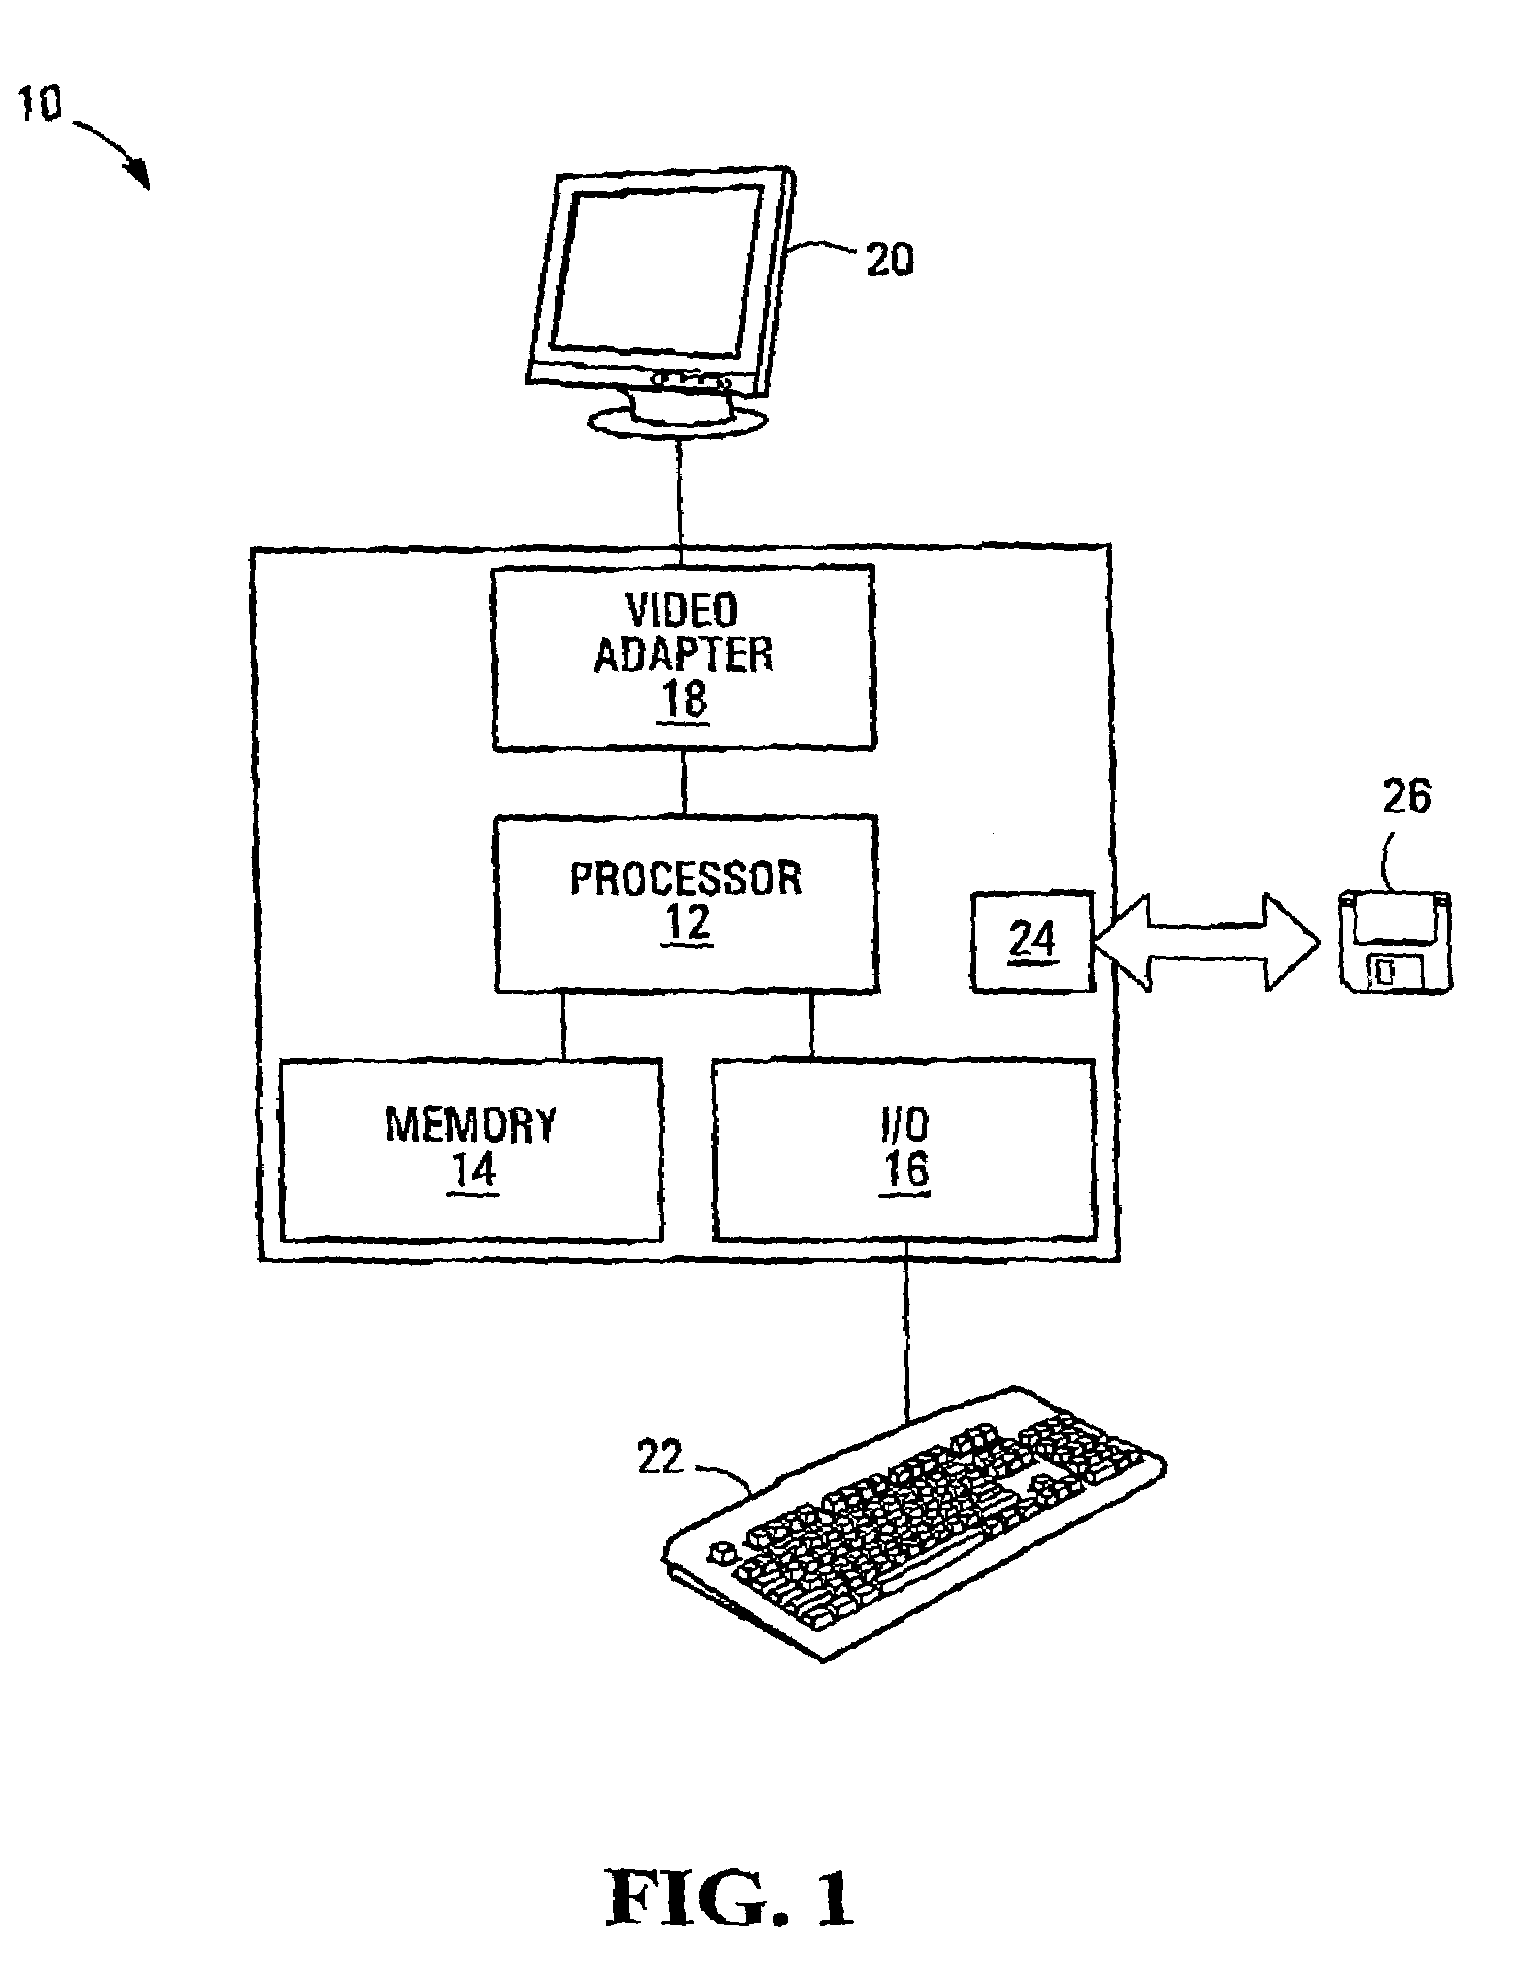 Software and methods for previewing parameter changes for a graphics display driver